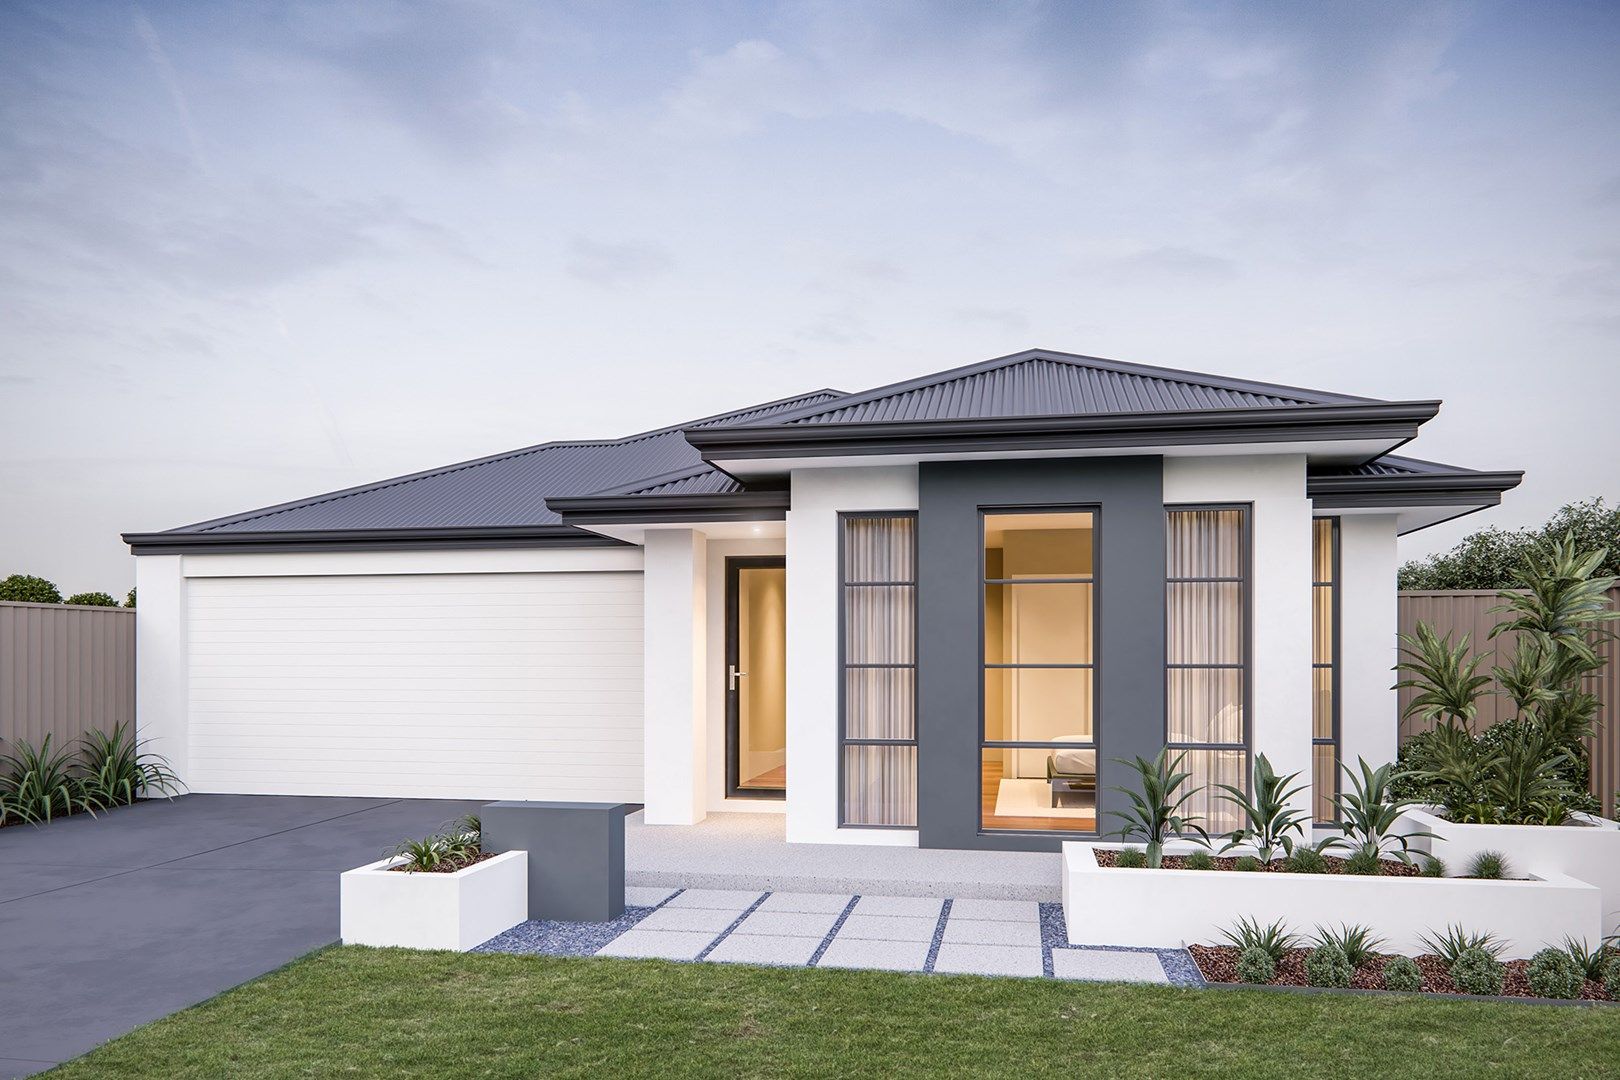 4 bedrooms New House & Land in Lot 55 Lillypilly Loop SINAGRA WA, 6065